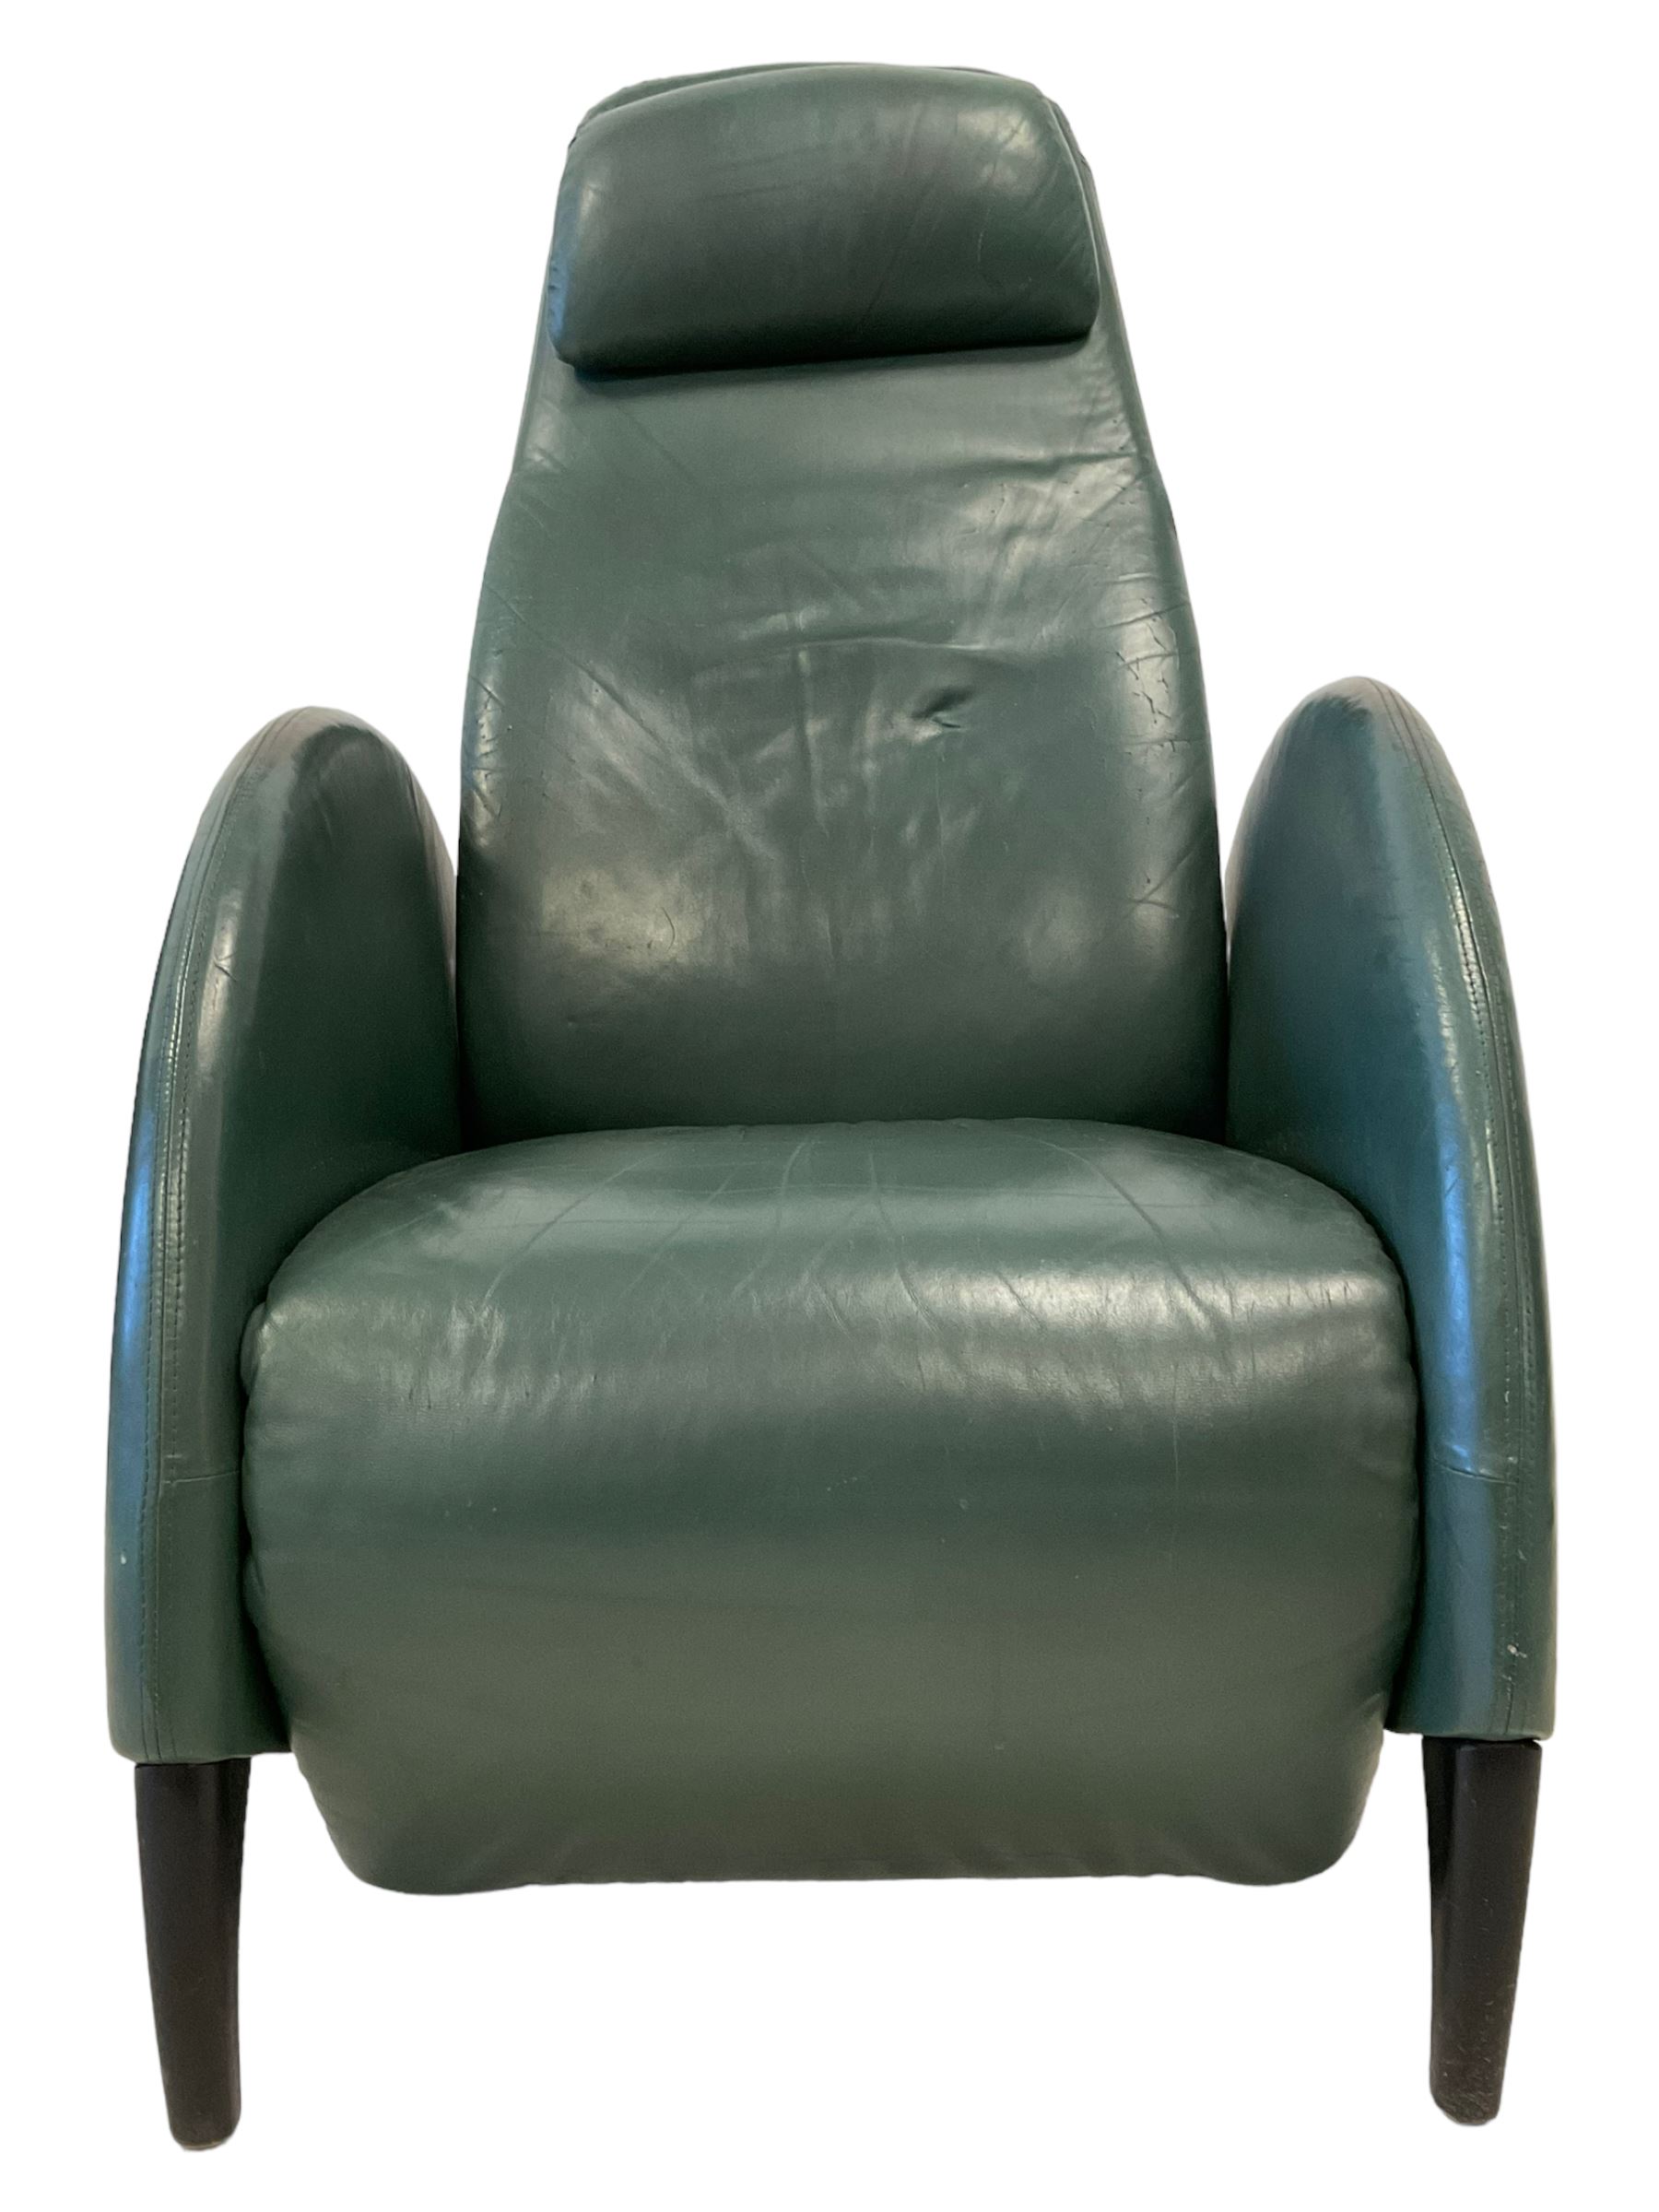 Late 20th century reclining armchair with magnetic headrest - Image 3 of 4